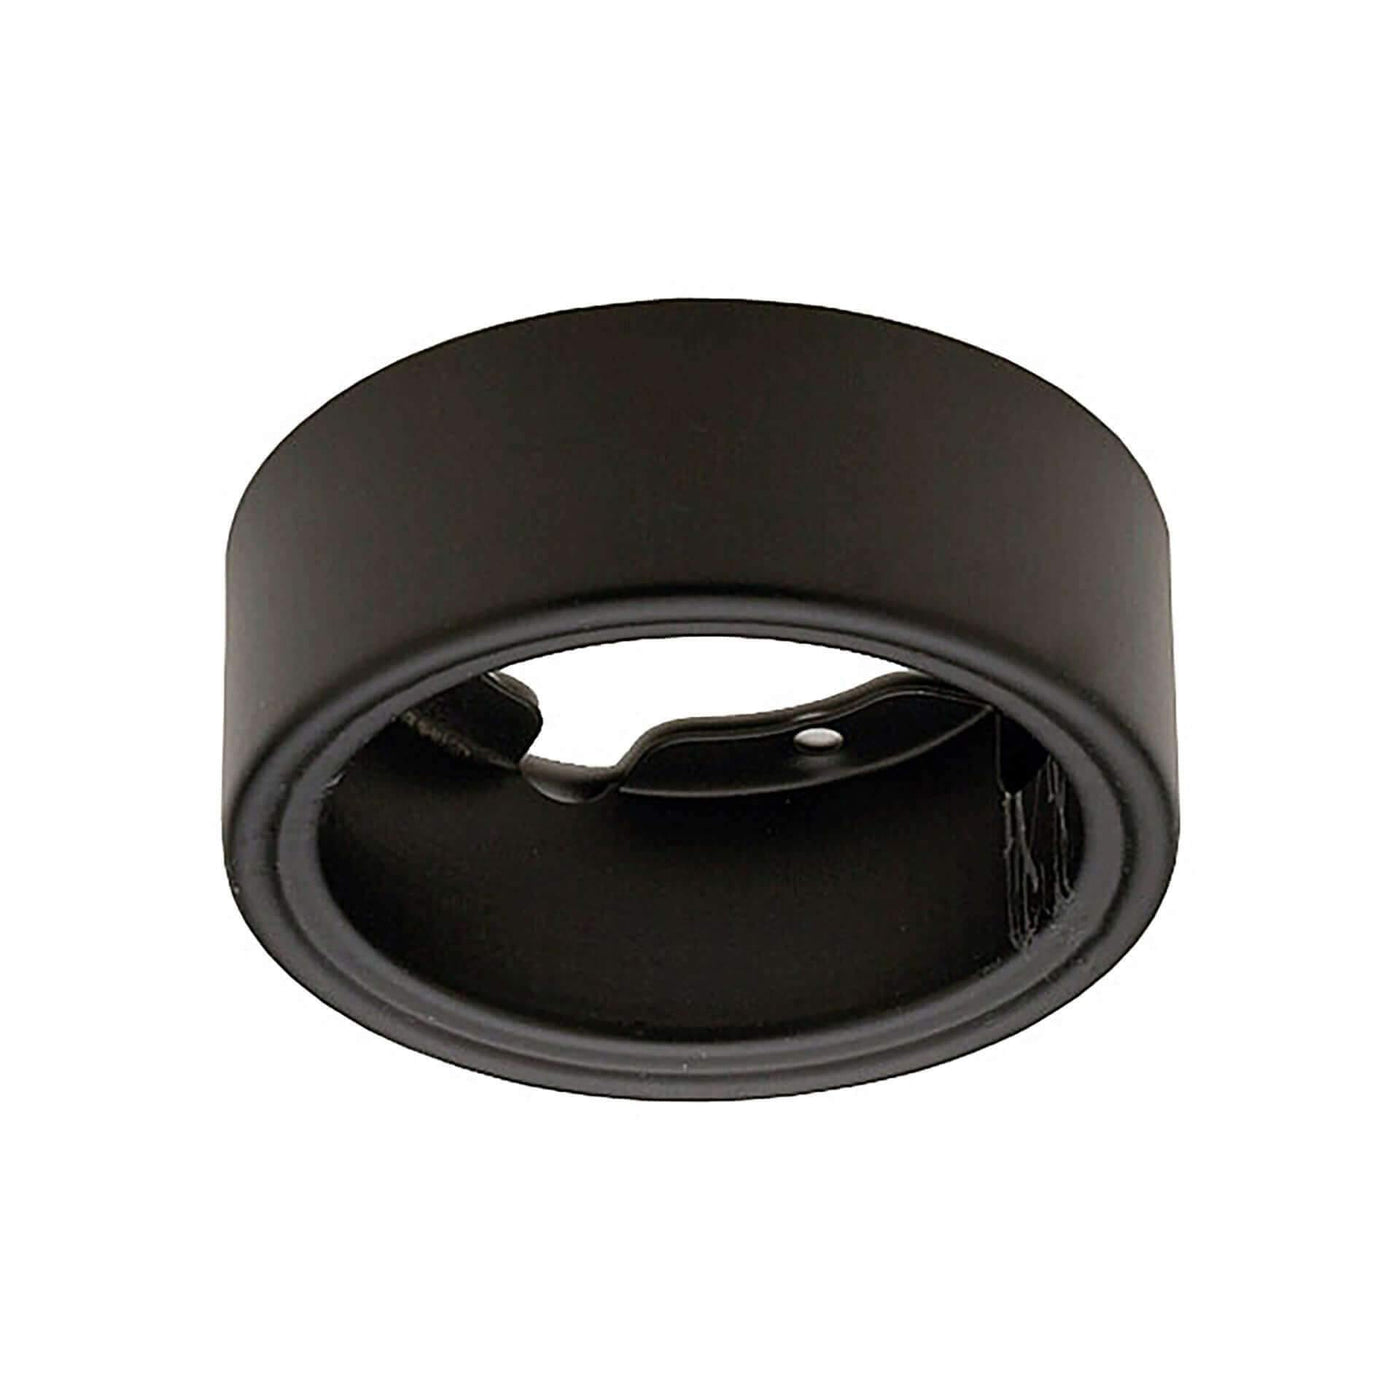 Surface Adapter For Recessed High Power Pucks - LV LIGHTING